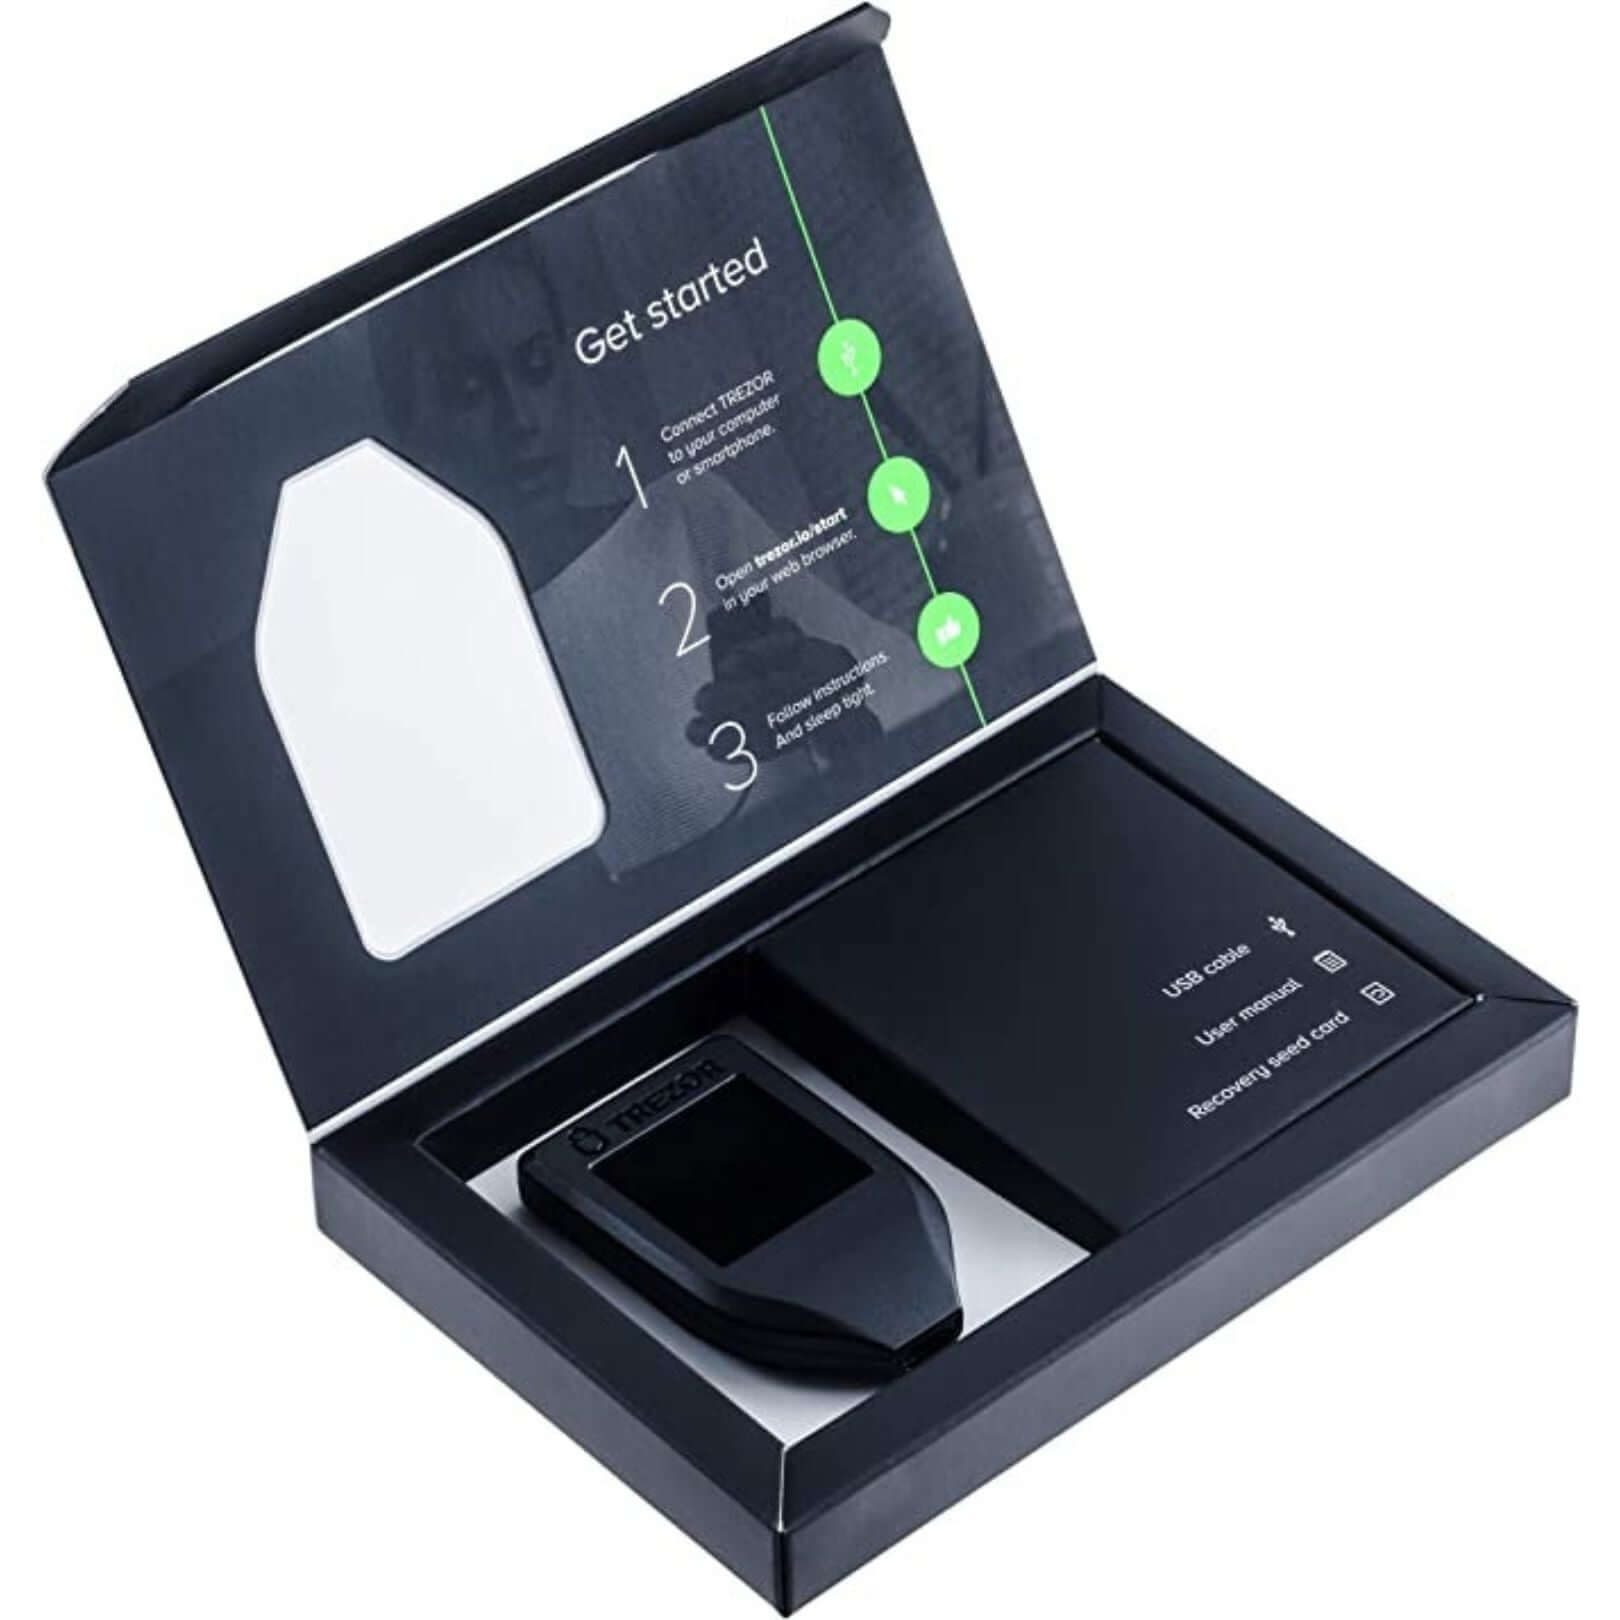 A black Trezor Model T cold wallet shown in its box.